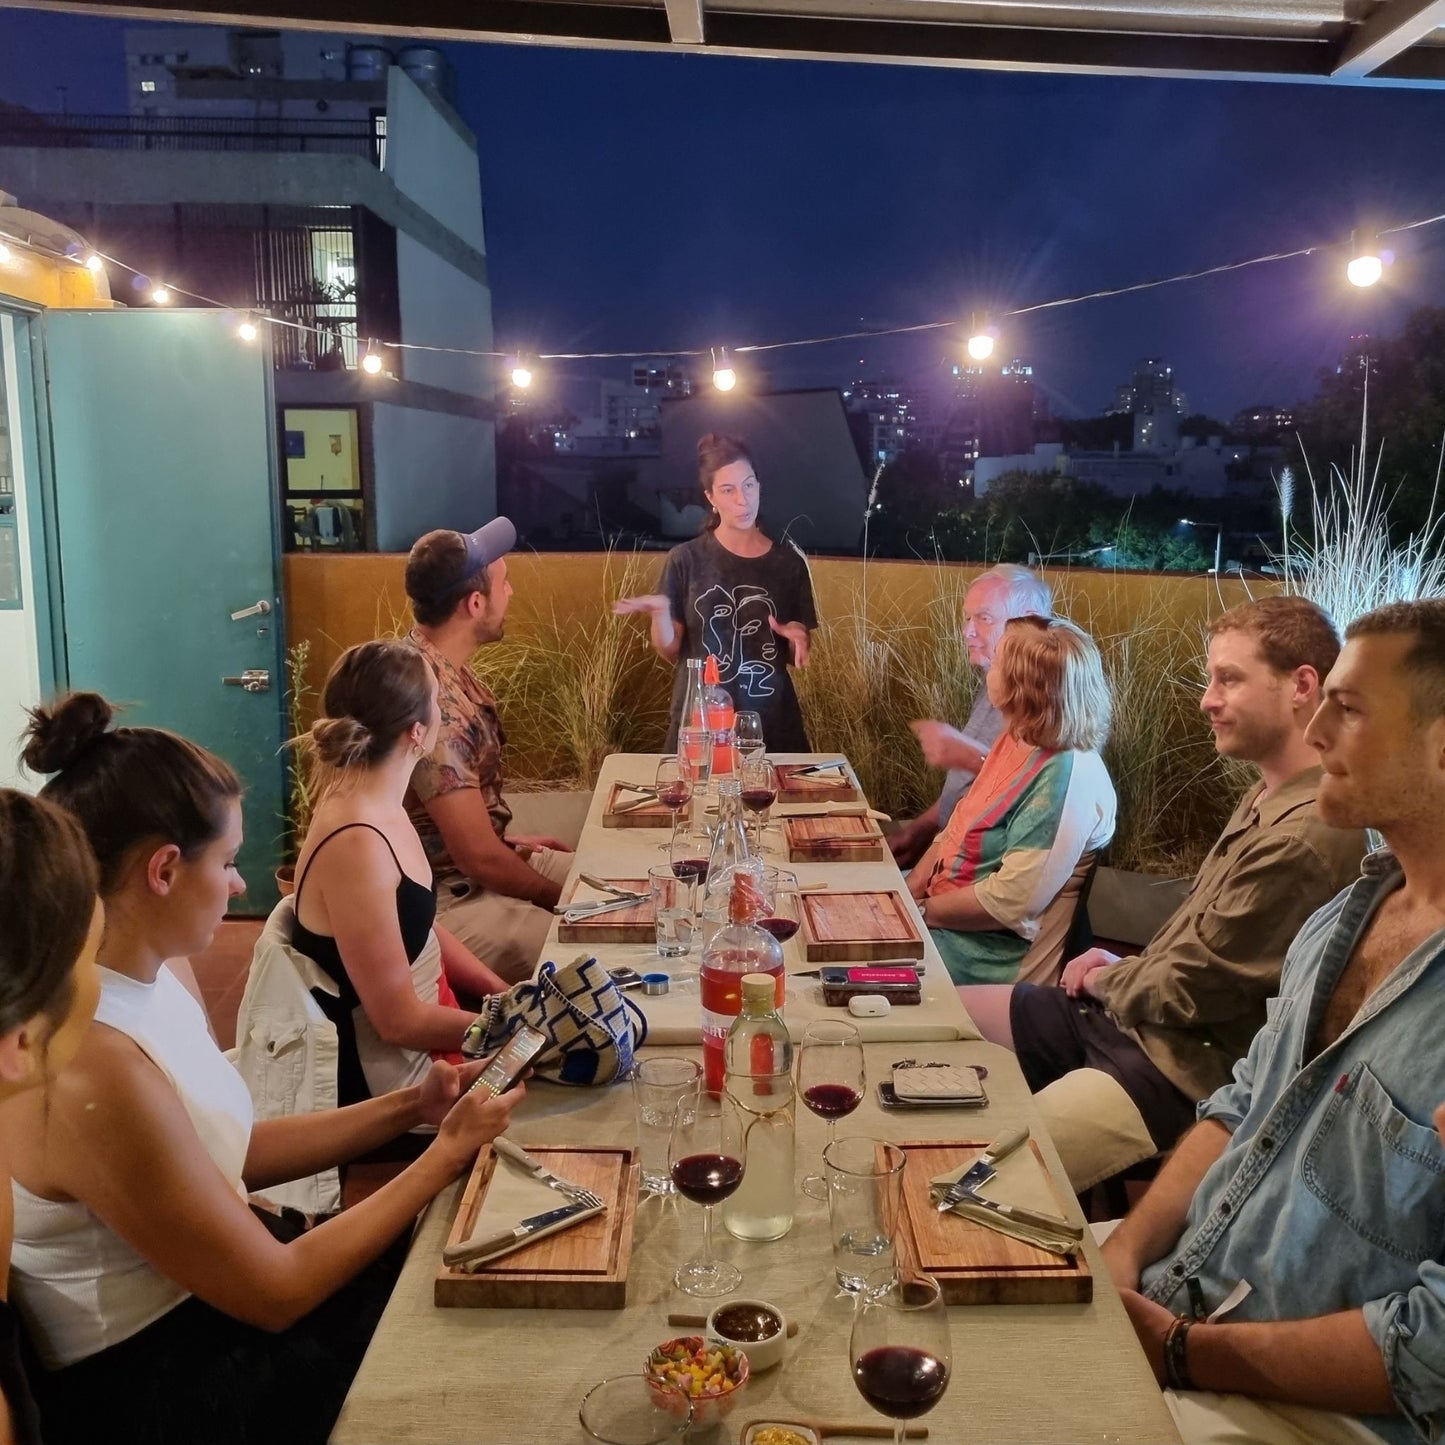 Rooftop Argentina Steak &amp; Flavors Experience